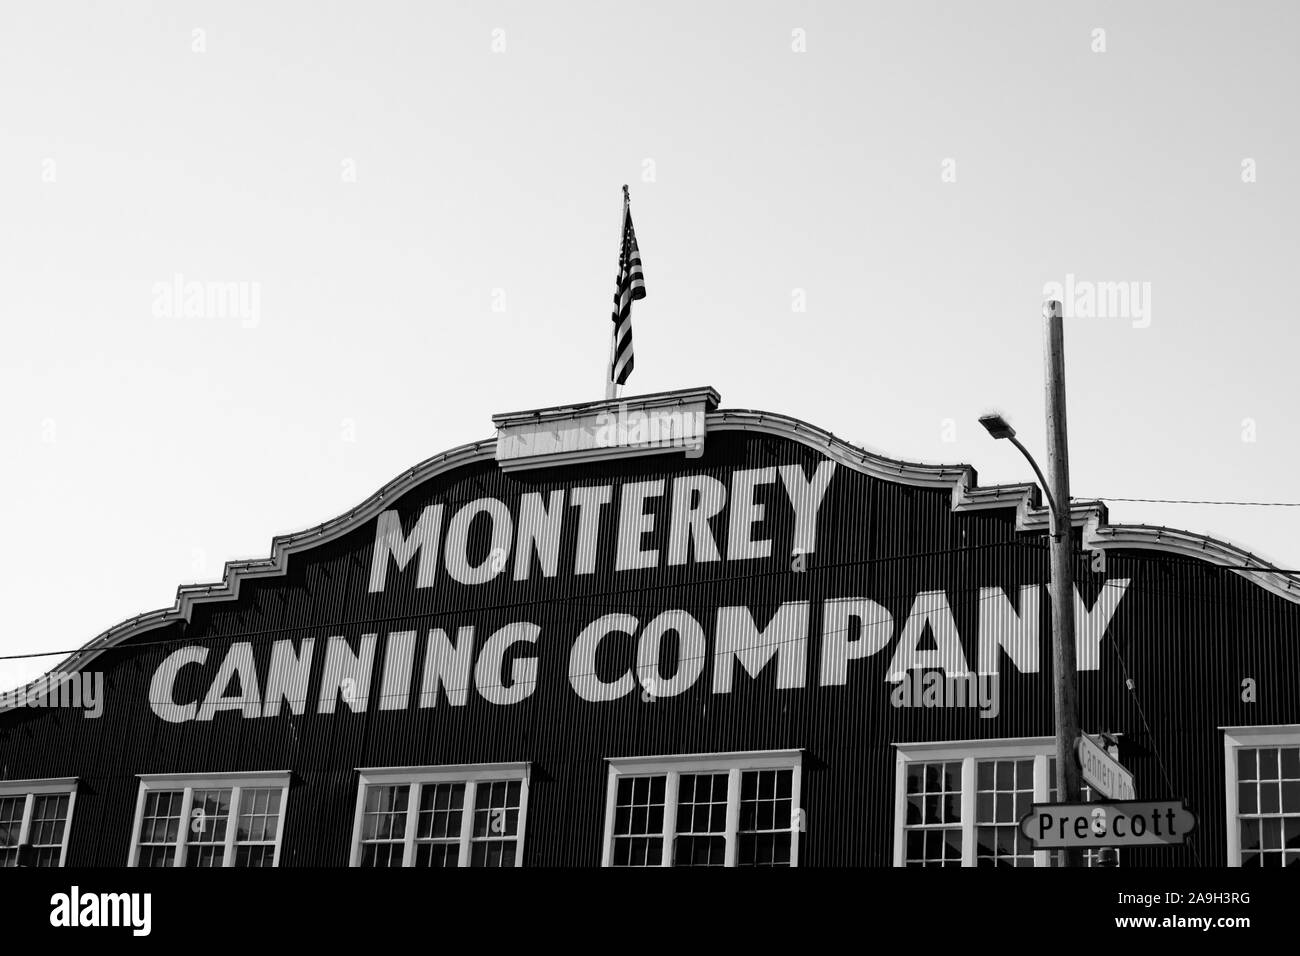 Monterey Canning Company corrugated iron building, Cannery Row, Monterey, California, United States of America. Black and white Stock Photo